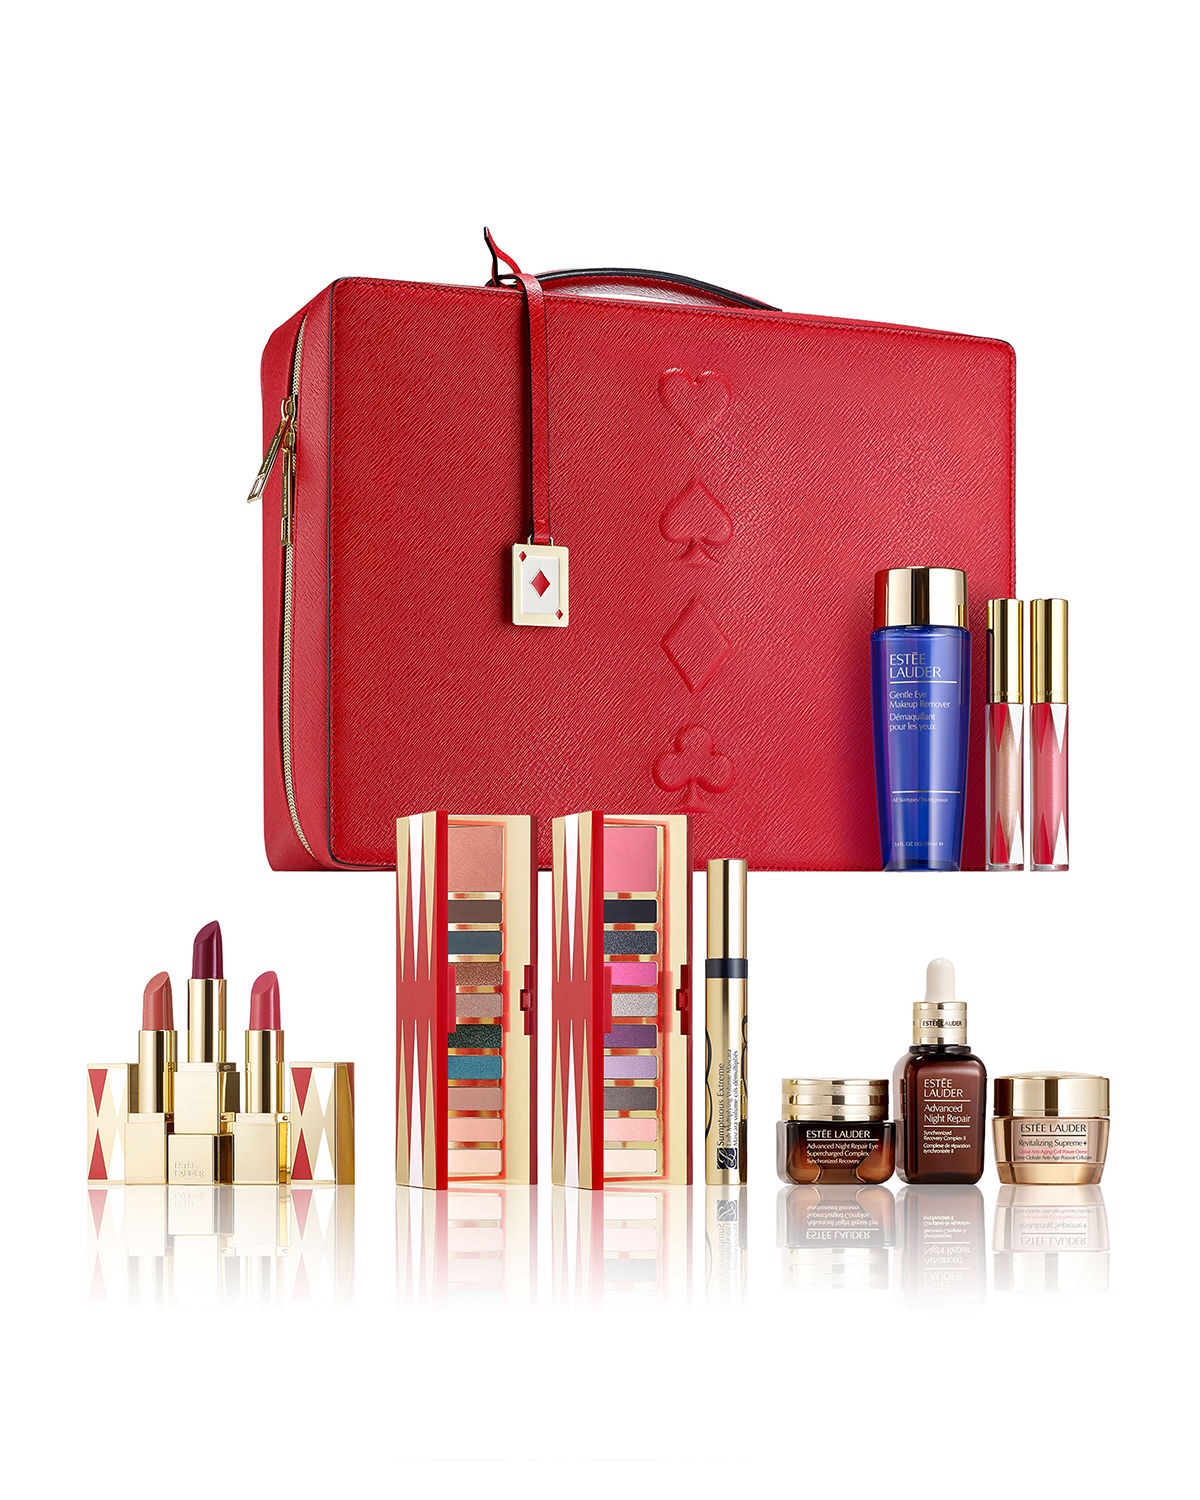 Estee Lauder 31 Beauty Essentials for the Price of One with any $45 Estee Lauder Purchase - Bergdorf Goodman